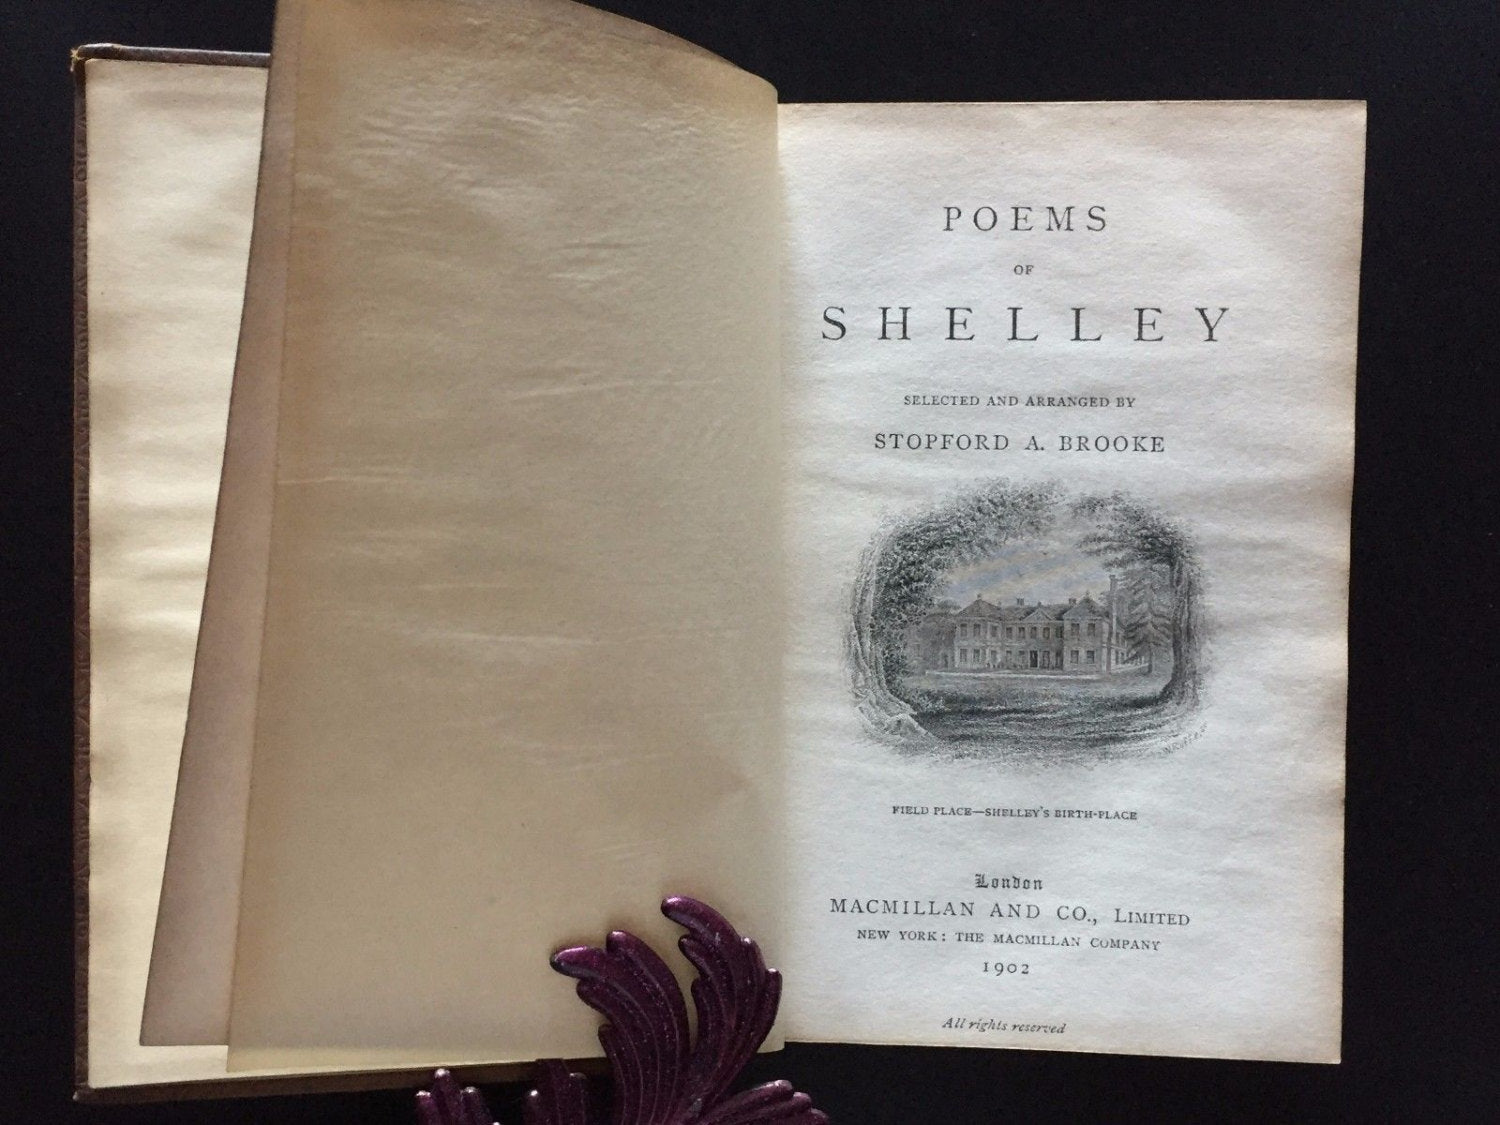 Poems of Shelley, Arranged by Stopford A. Brooke, Leather, 1902